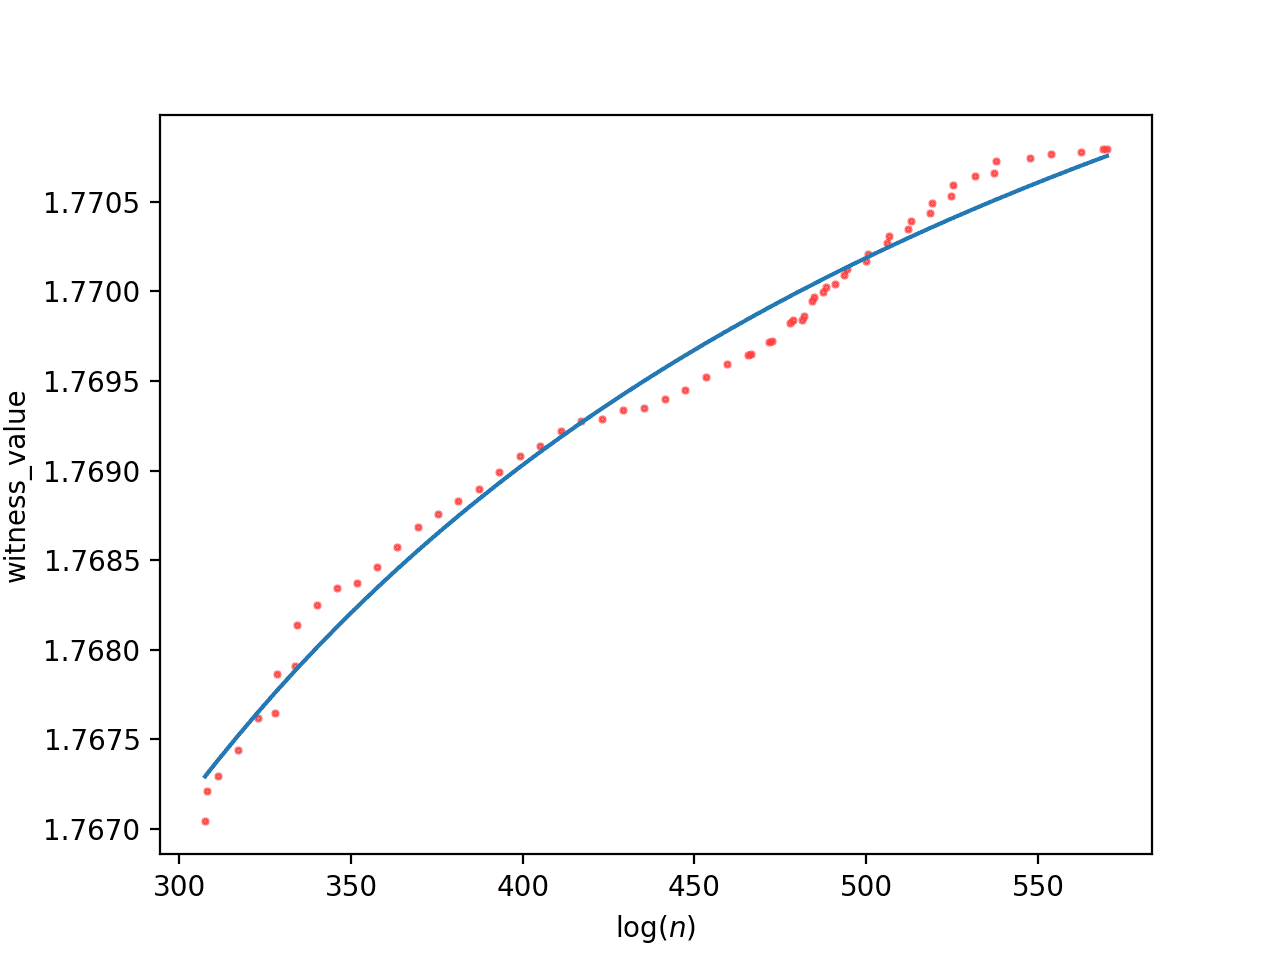 The reciprocal approximation of the small database with asymptote 1.77481154